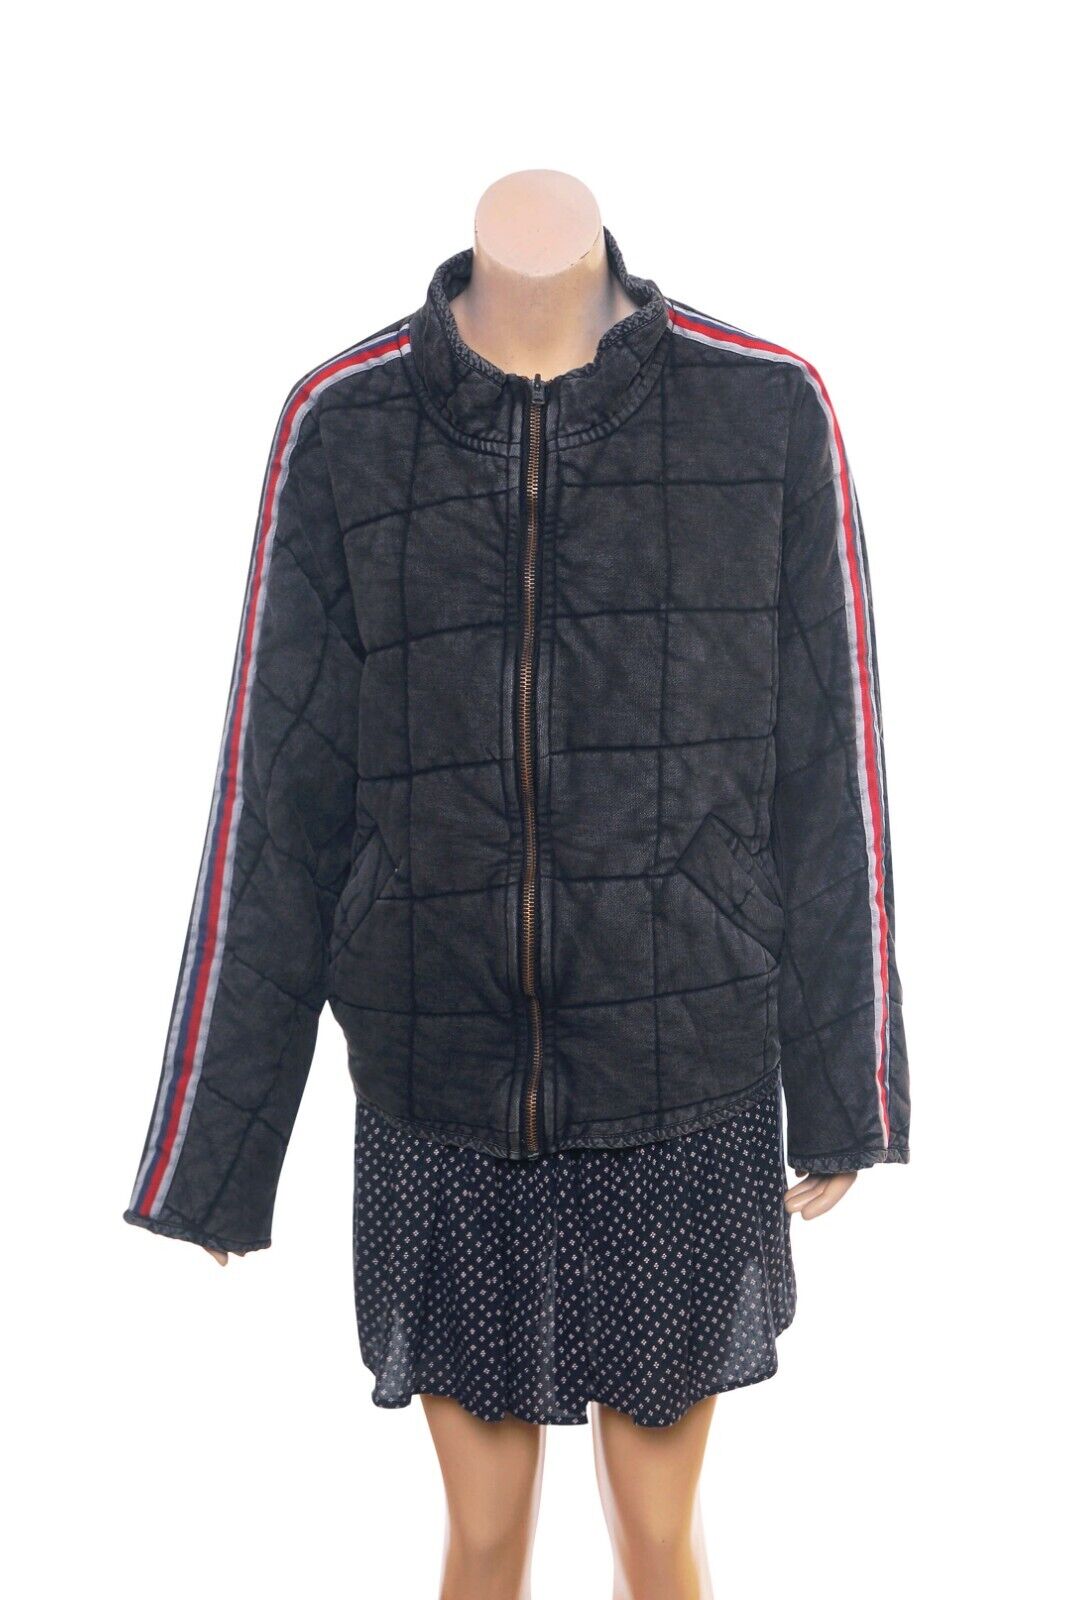 Free People Sports Rib Dolman Quilted Jacket